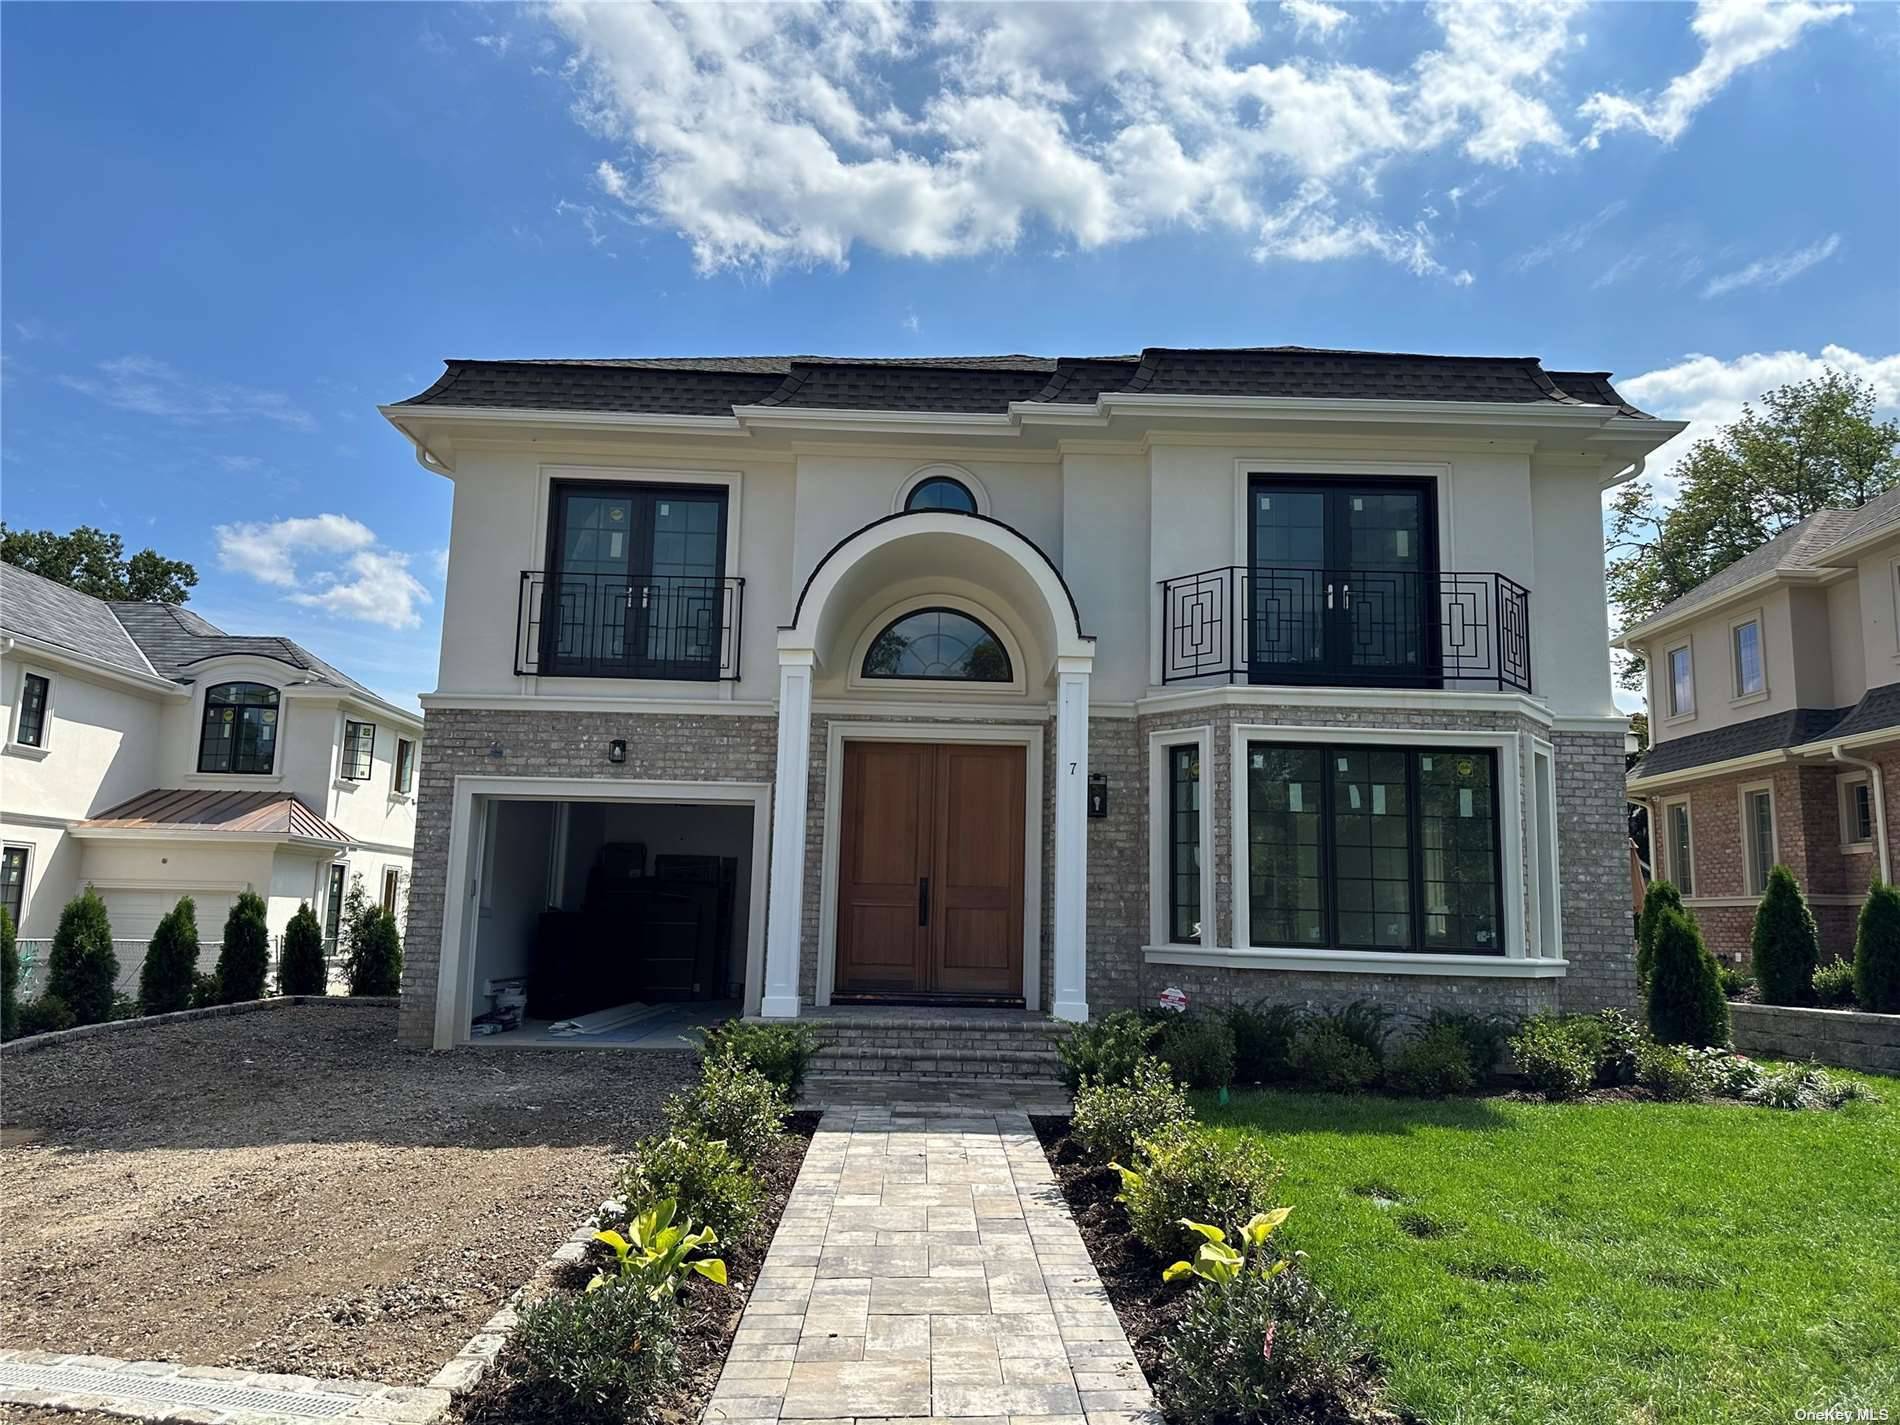 Brand New Luxury Stucco Side Hall Colonial Filled With Natural Sun Light Featuring Living Room W Fireplace, Dining Room, Den Family Room, Kitchen with Breakfast Area and Custom Cabinetry with ...